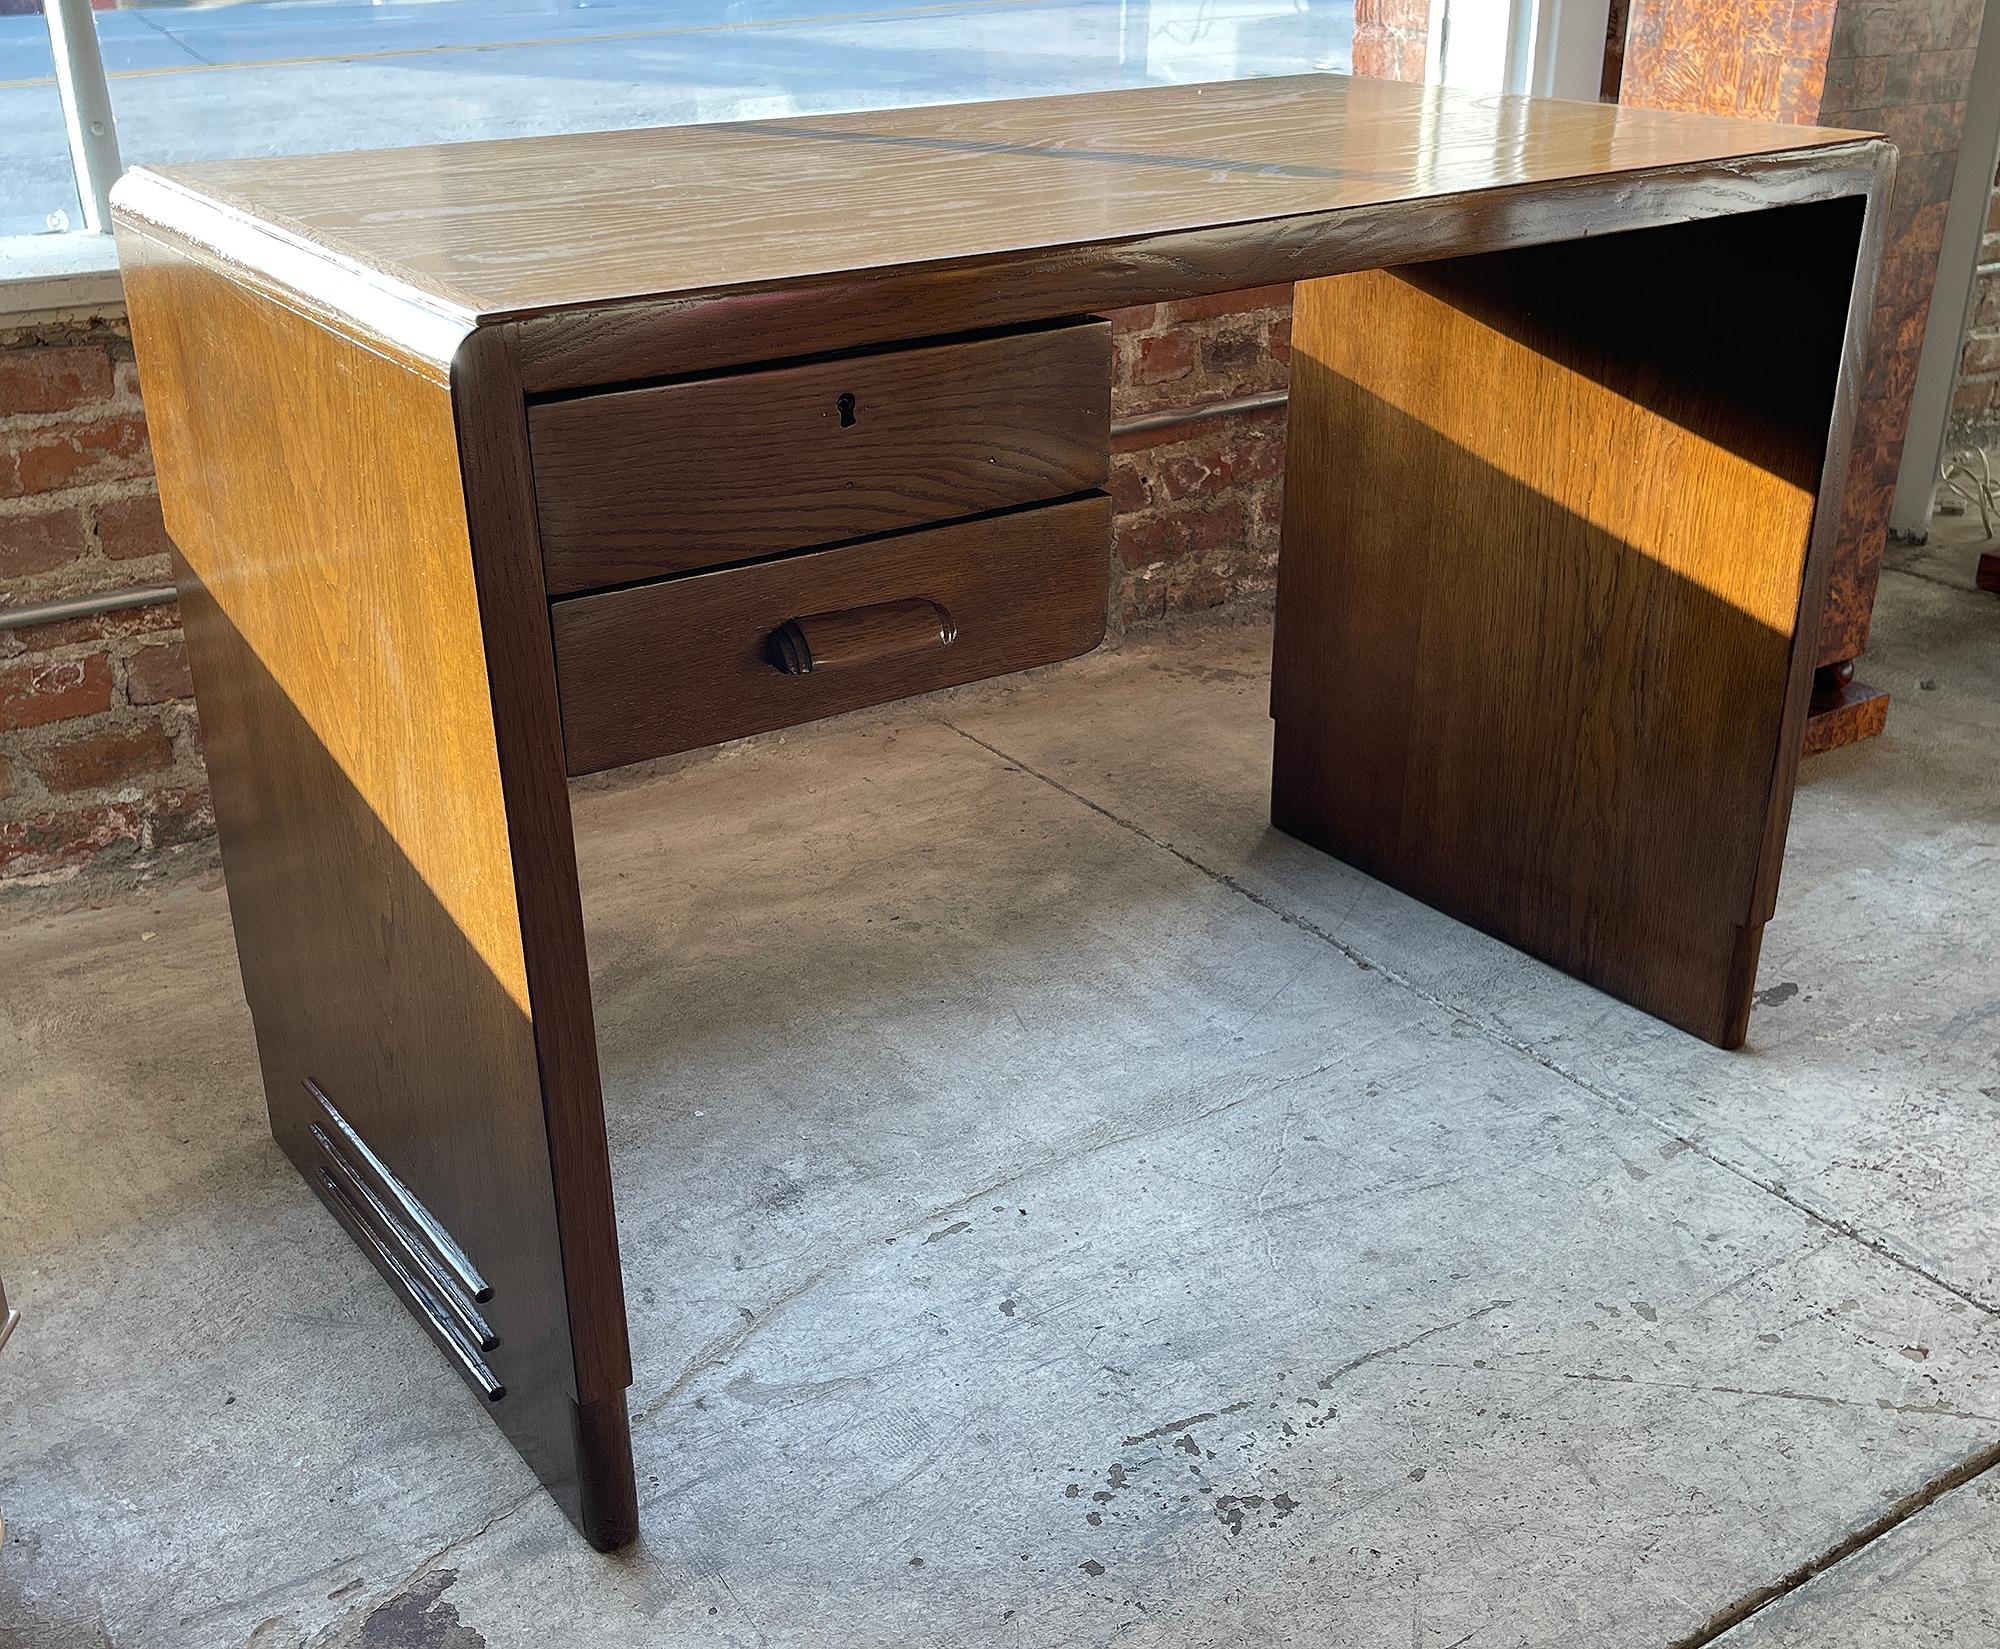 Jean Pascaud Student Desk in wood 1930 - Wooden top In Excellent Condition For Sale In Encino, CA